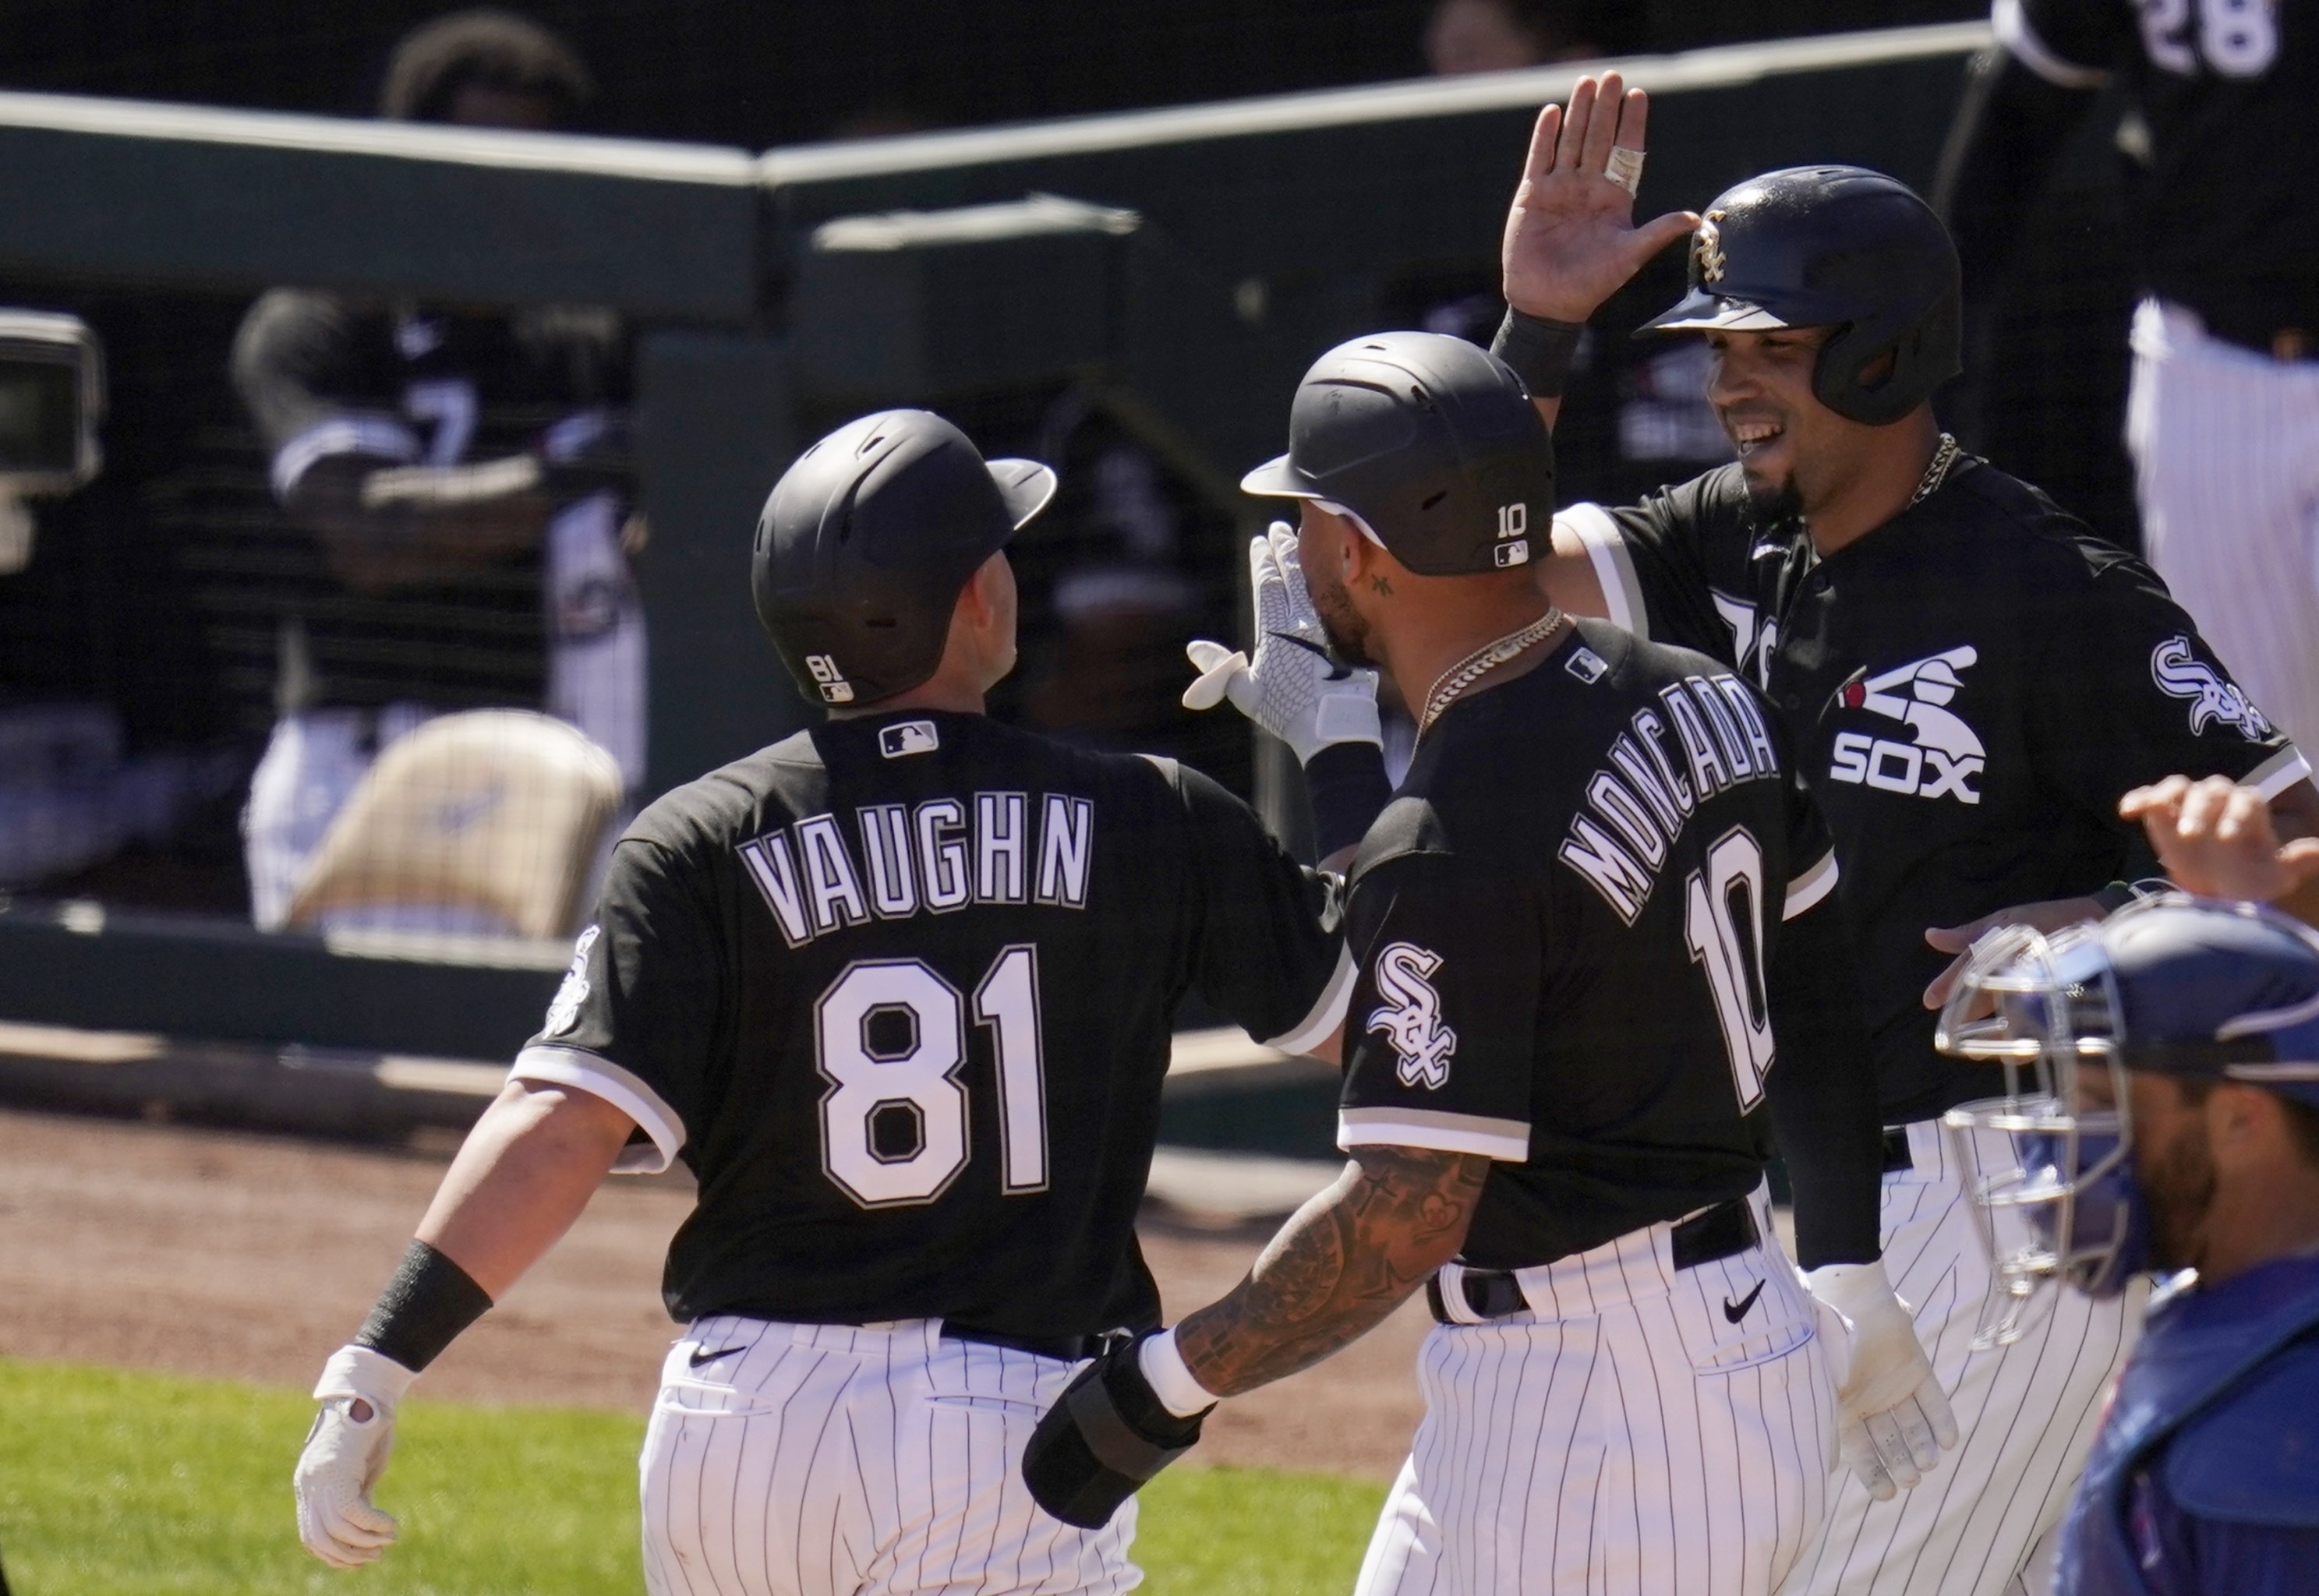 Ranking this White Sox season on the misery scale: Chicago